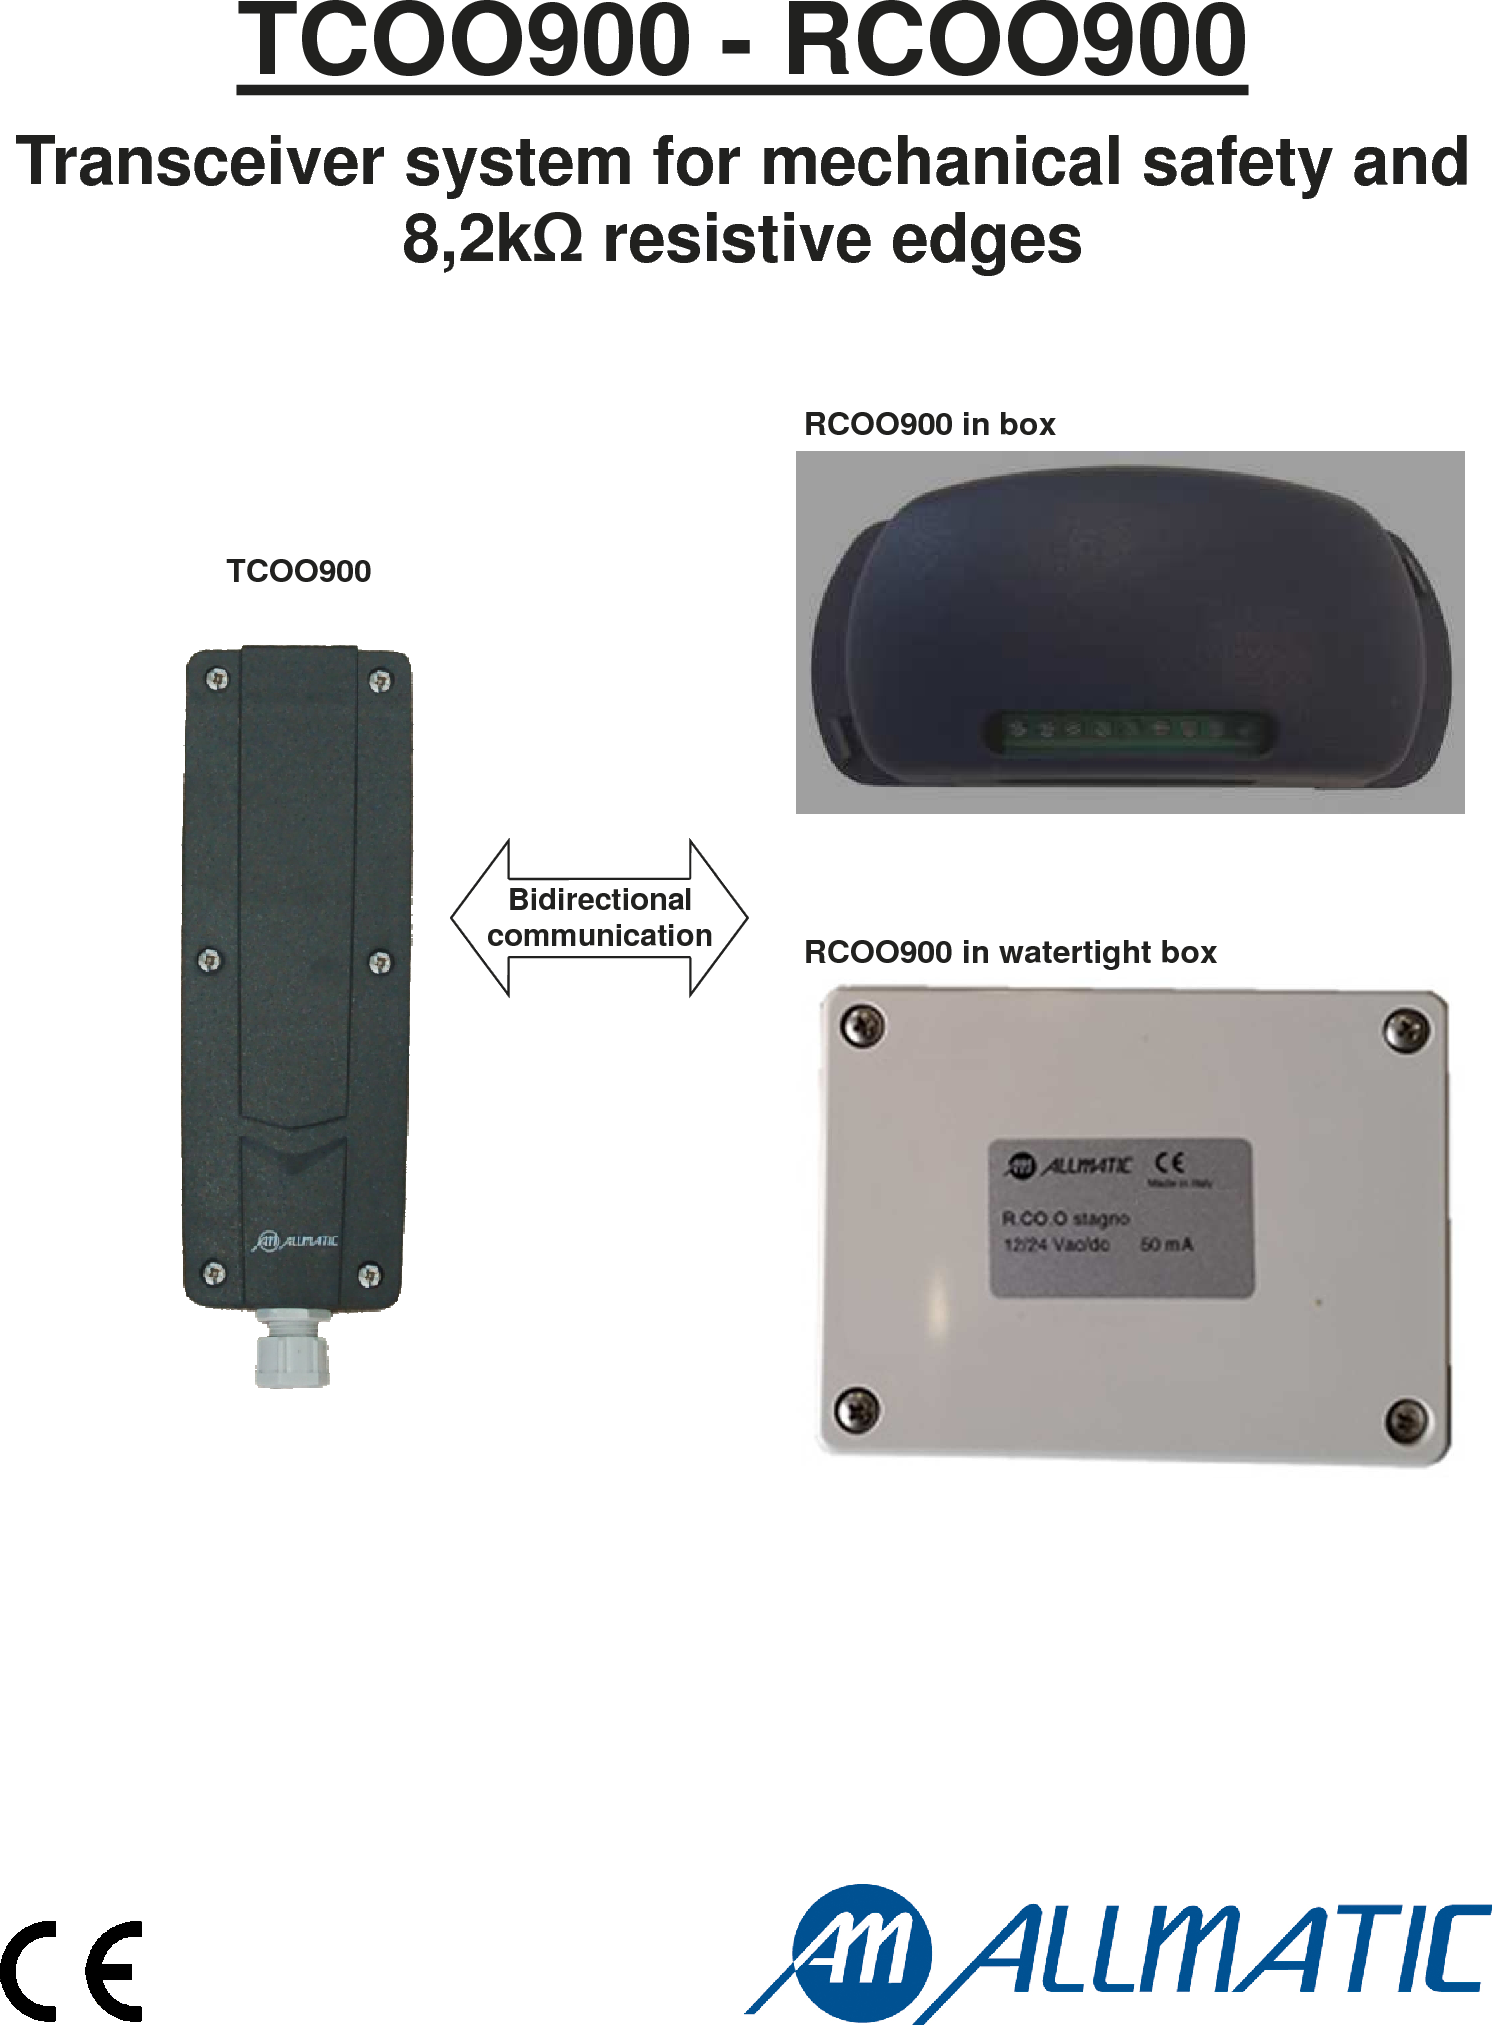 TCOO900 - RCOO900 TCOO900 RCOO900 in box Bidirectional communication RCOO900 in watertight box Transceiver system for mechanical safety and 8,2kΩ resistive edges 